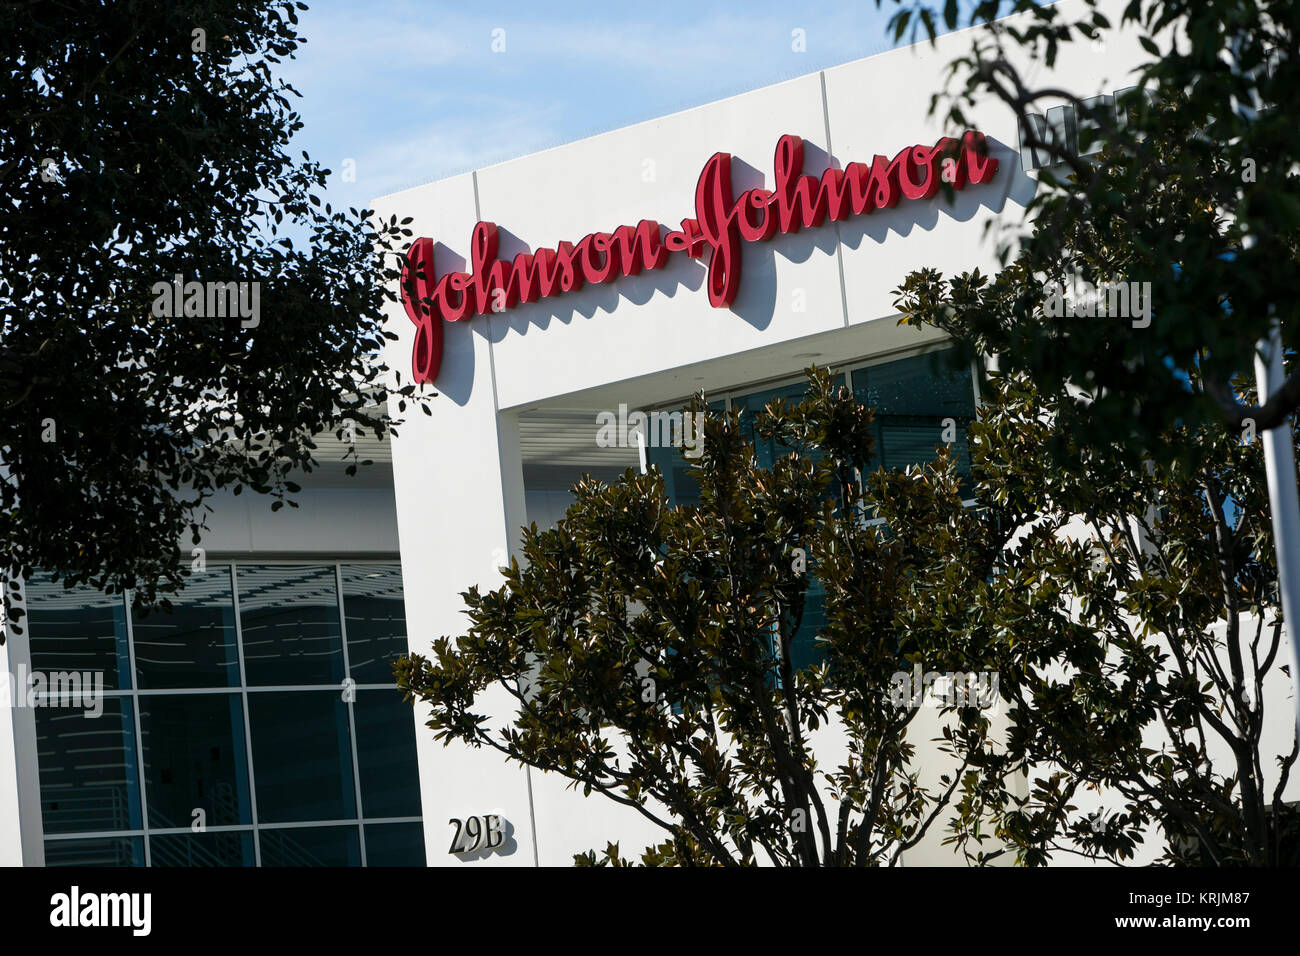 A logo sign outside of a facility occupied by Johnson & Johnson in Irvine, California on December 9, 2017. Stock Photo